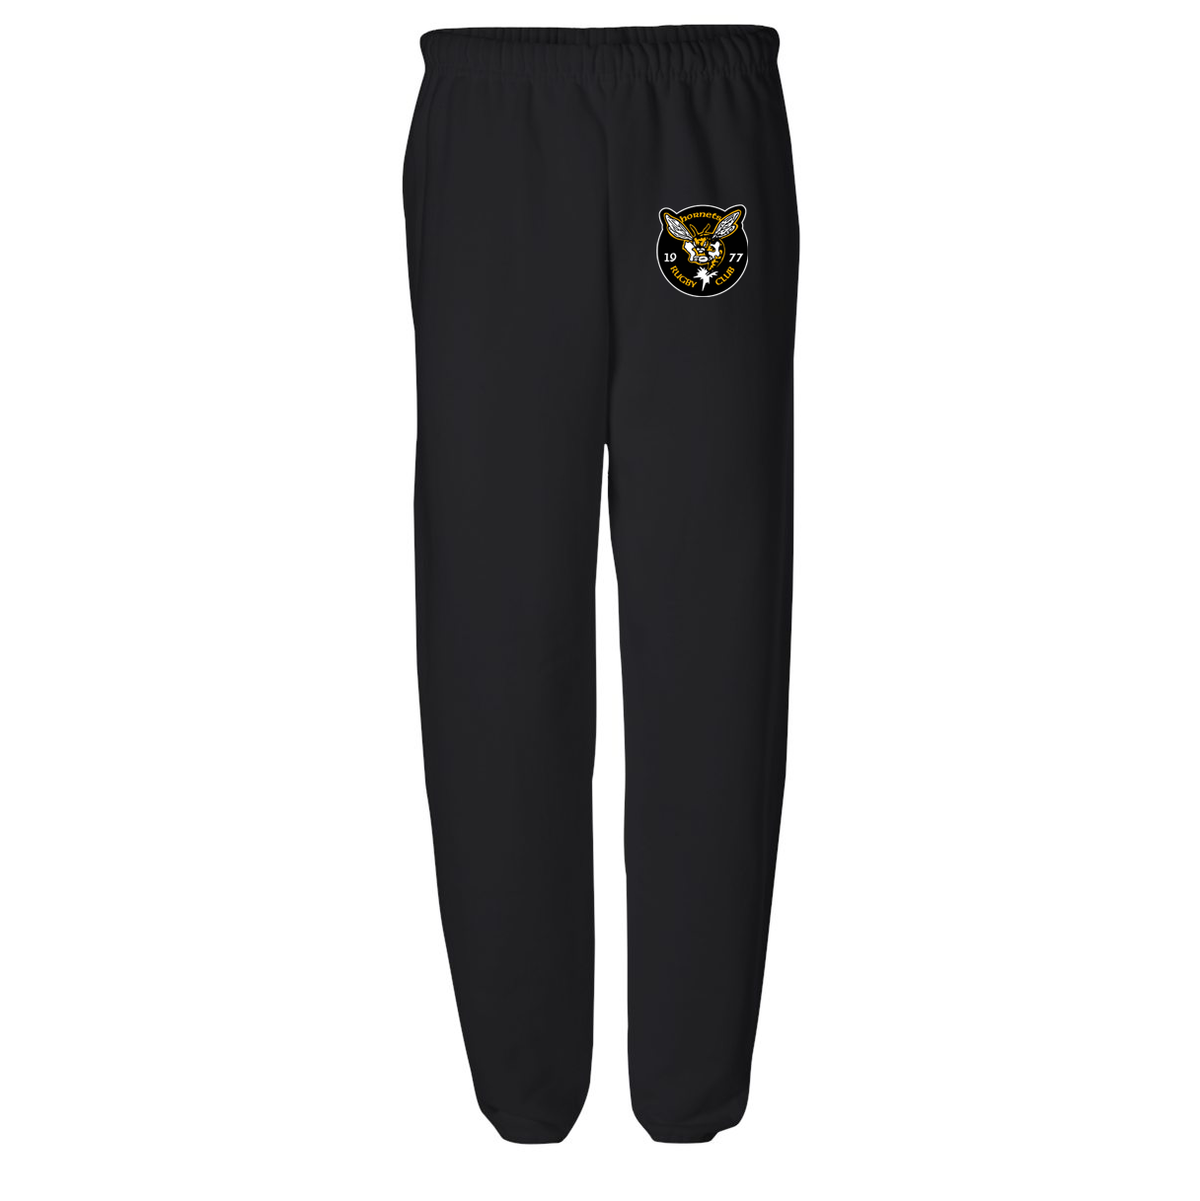 St. Louis Hornets Rugby Club NuBlend Sweatpants